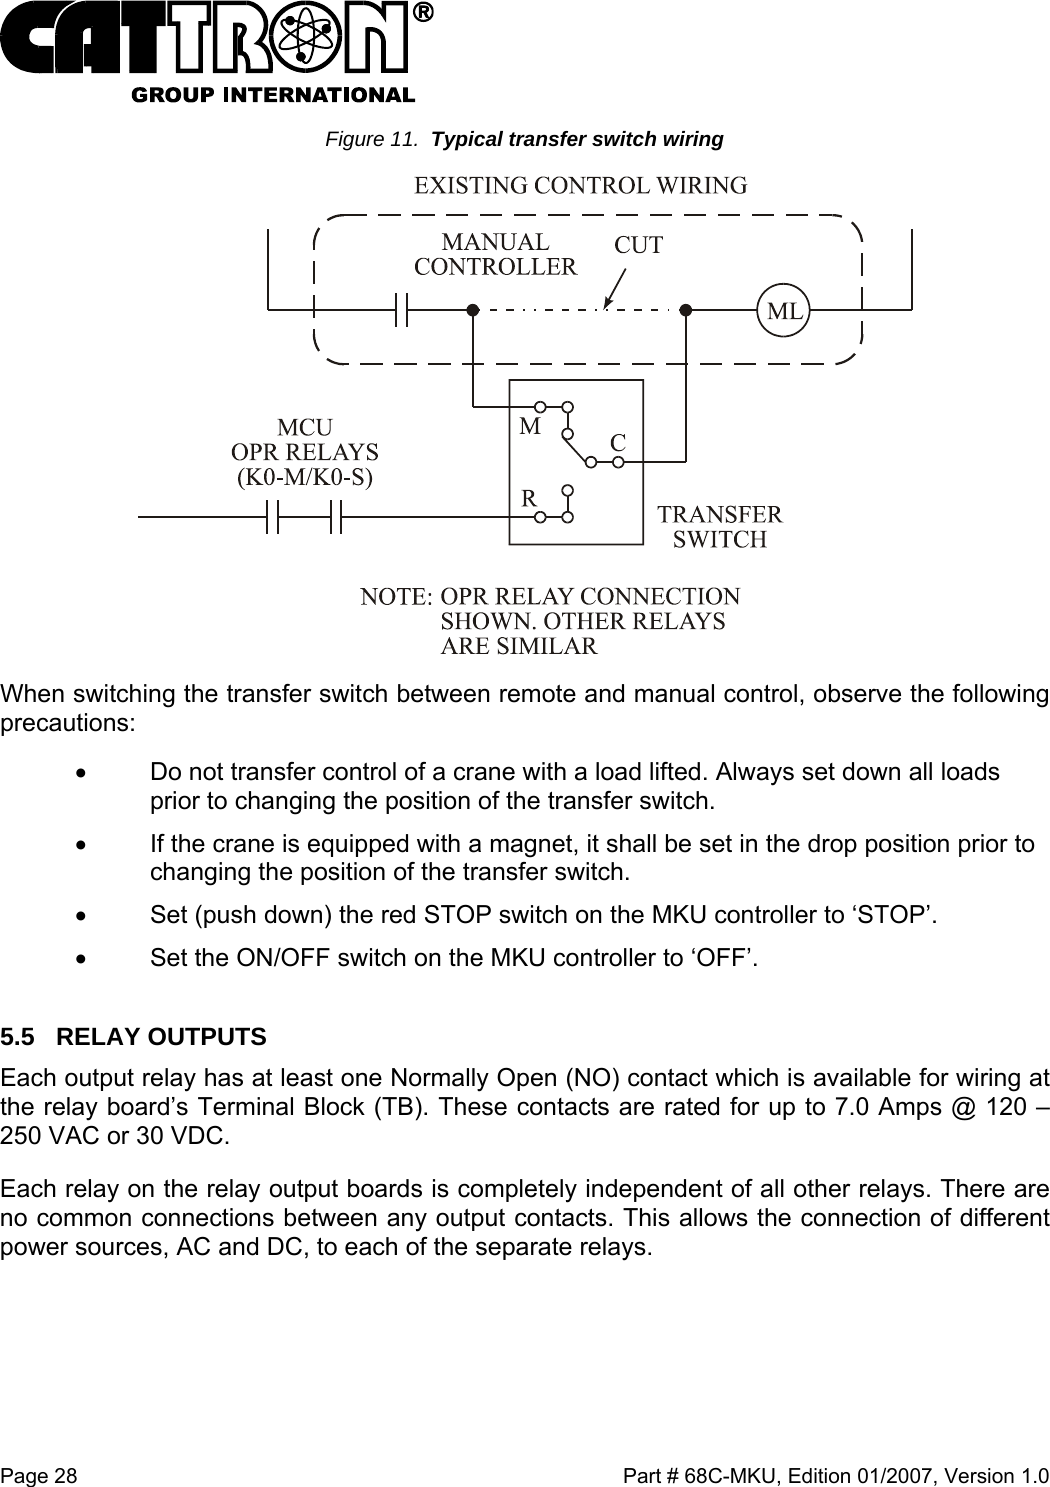  Page 28    Part # 68C-MKU, Edition 01/2007, Version 1.0 Figure 11.  Typical transfer switch wiring    When switching the transfer switch between remote and manual control, observe the following precautions: •  Do not transfer control of a crane with a load lifted. Always set down all loads prior to changing the position of the transfer switch. •  If the crane is equipped with a magnet, it shall be set in the drop position prior to changing the position of the transfer switch. •  Set (push down) the red STOP switch on the MKU controller to ‘STOP’. •  Set the ON/OFF switch on the MKU controller to ‘OFF’. 5.5 RELAY OUTPUTS Each output relay has at least one Normally Open (NO) contact which is available for wiring at the relay board’s Terminal Block (TB). These contacts are rated for up to 7.0 Amps @ 120 – 250 VAC or 30 VDC.  Each relay on the relay output boards is completely independent of all other relays. There are no common connections between any output contacts. This allows the connection of different power sources, AC and DC, to each of the separate relays. 